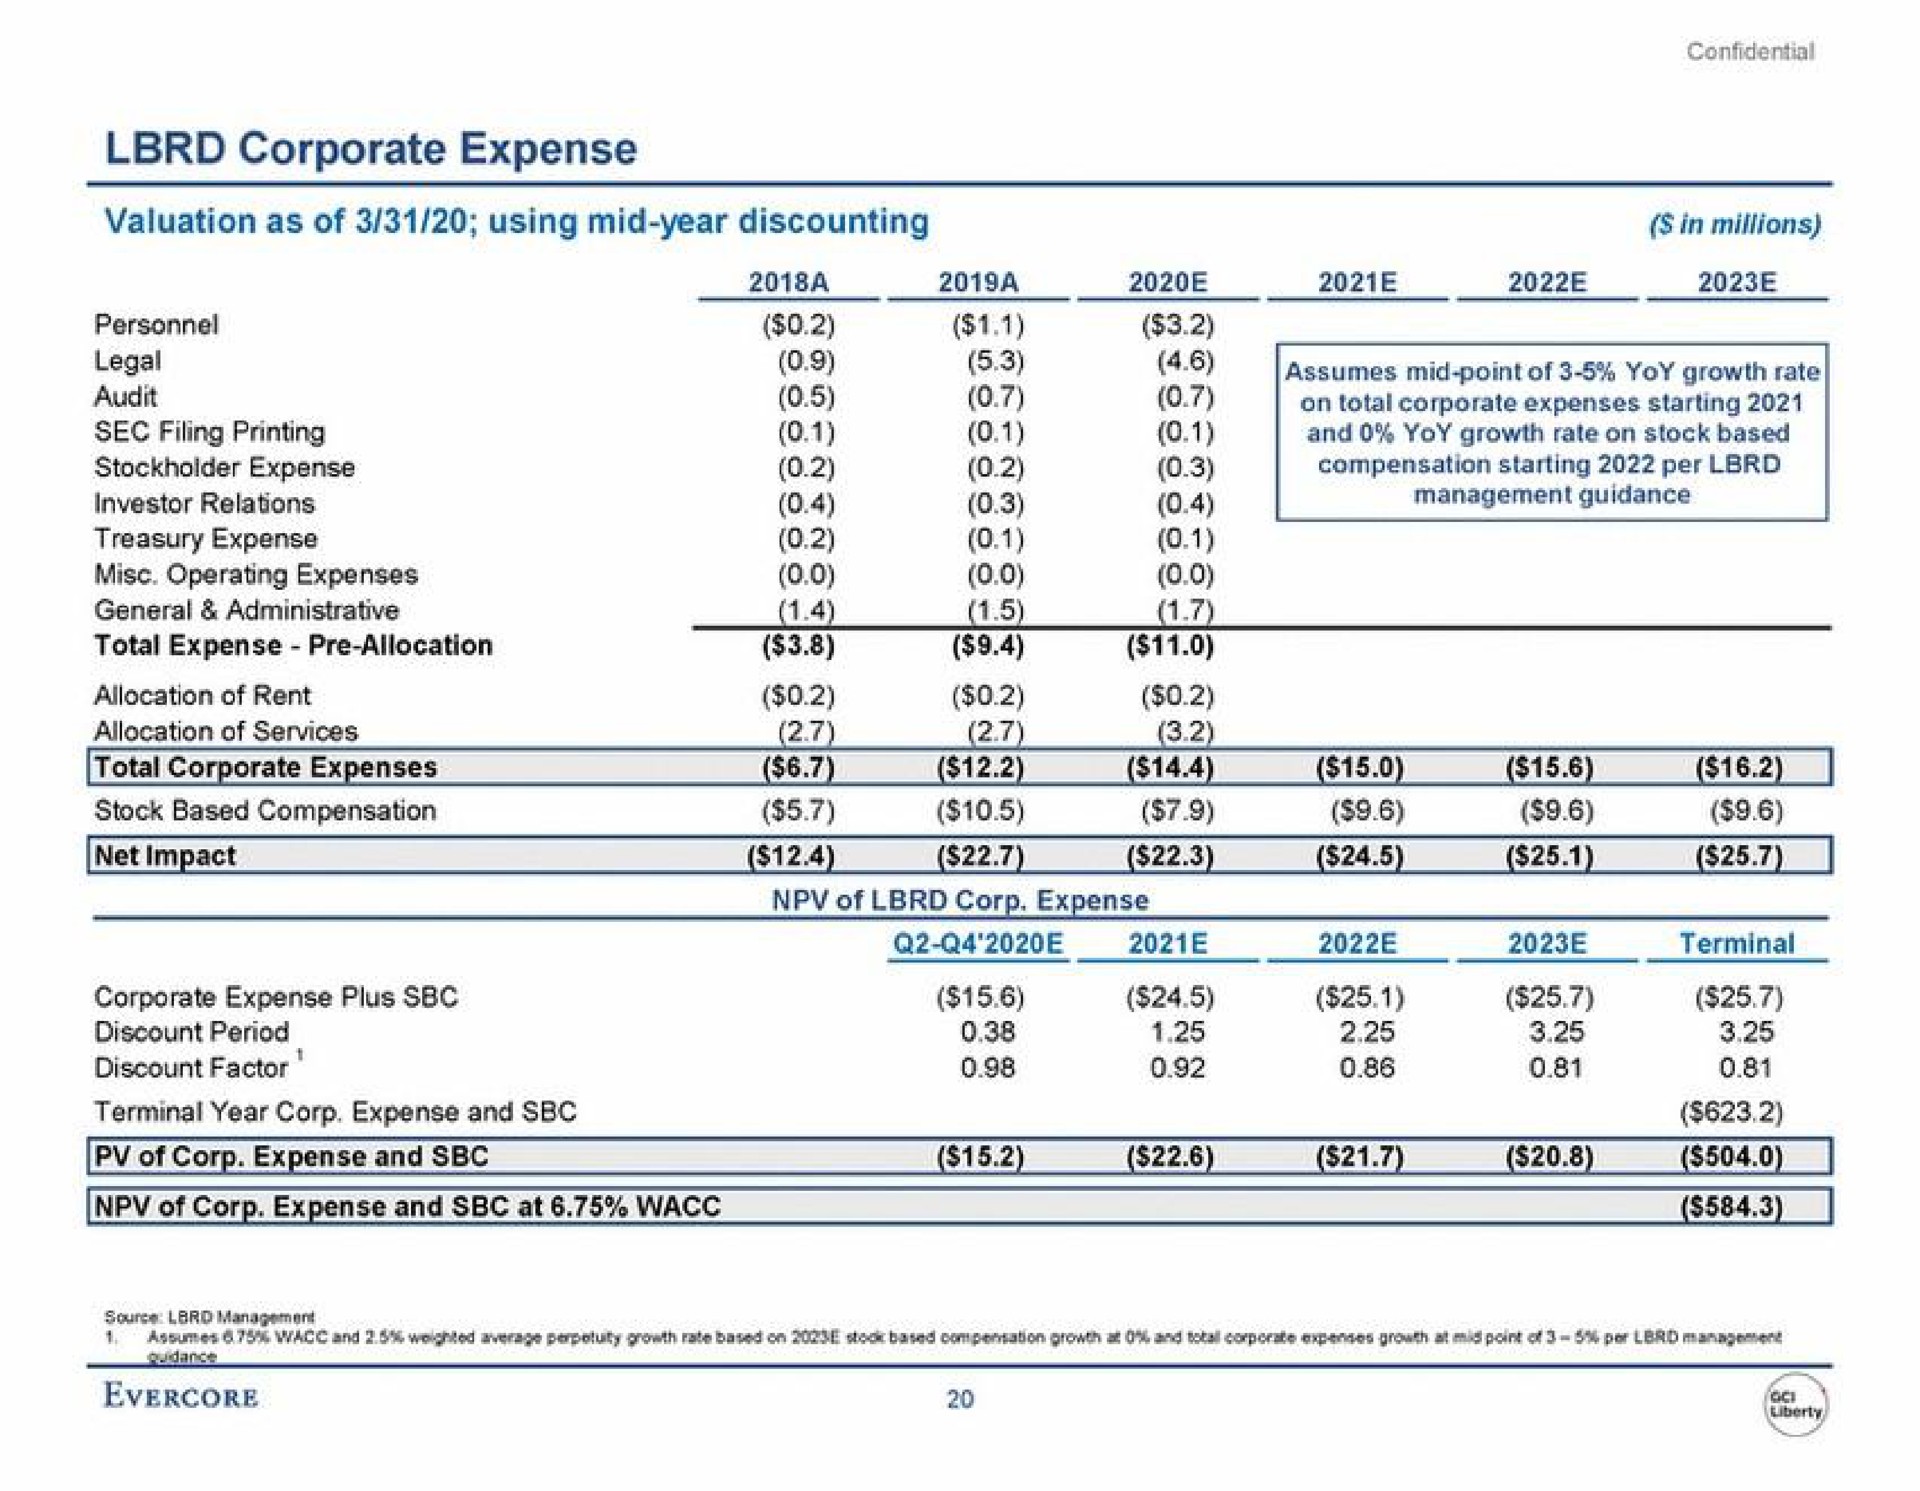 corporate expense terminal year expense and cry | Evercore